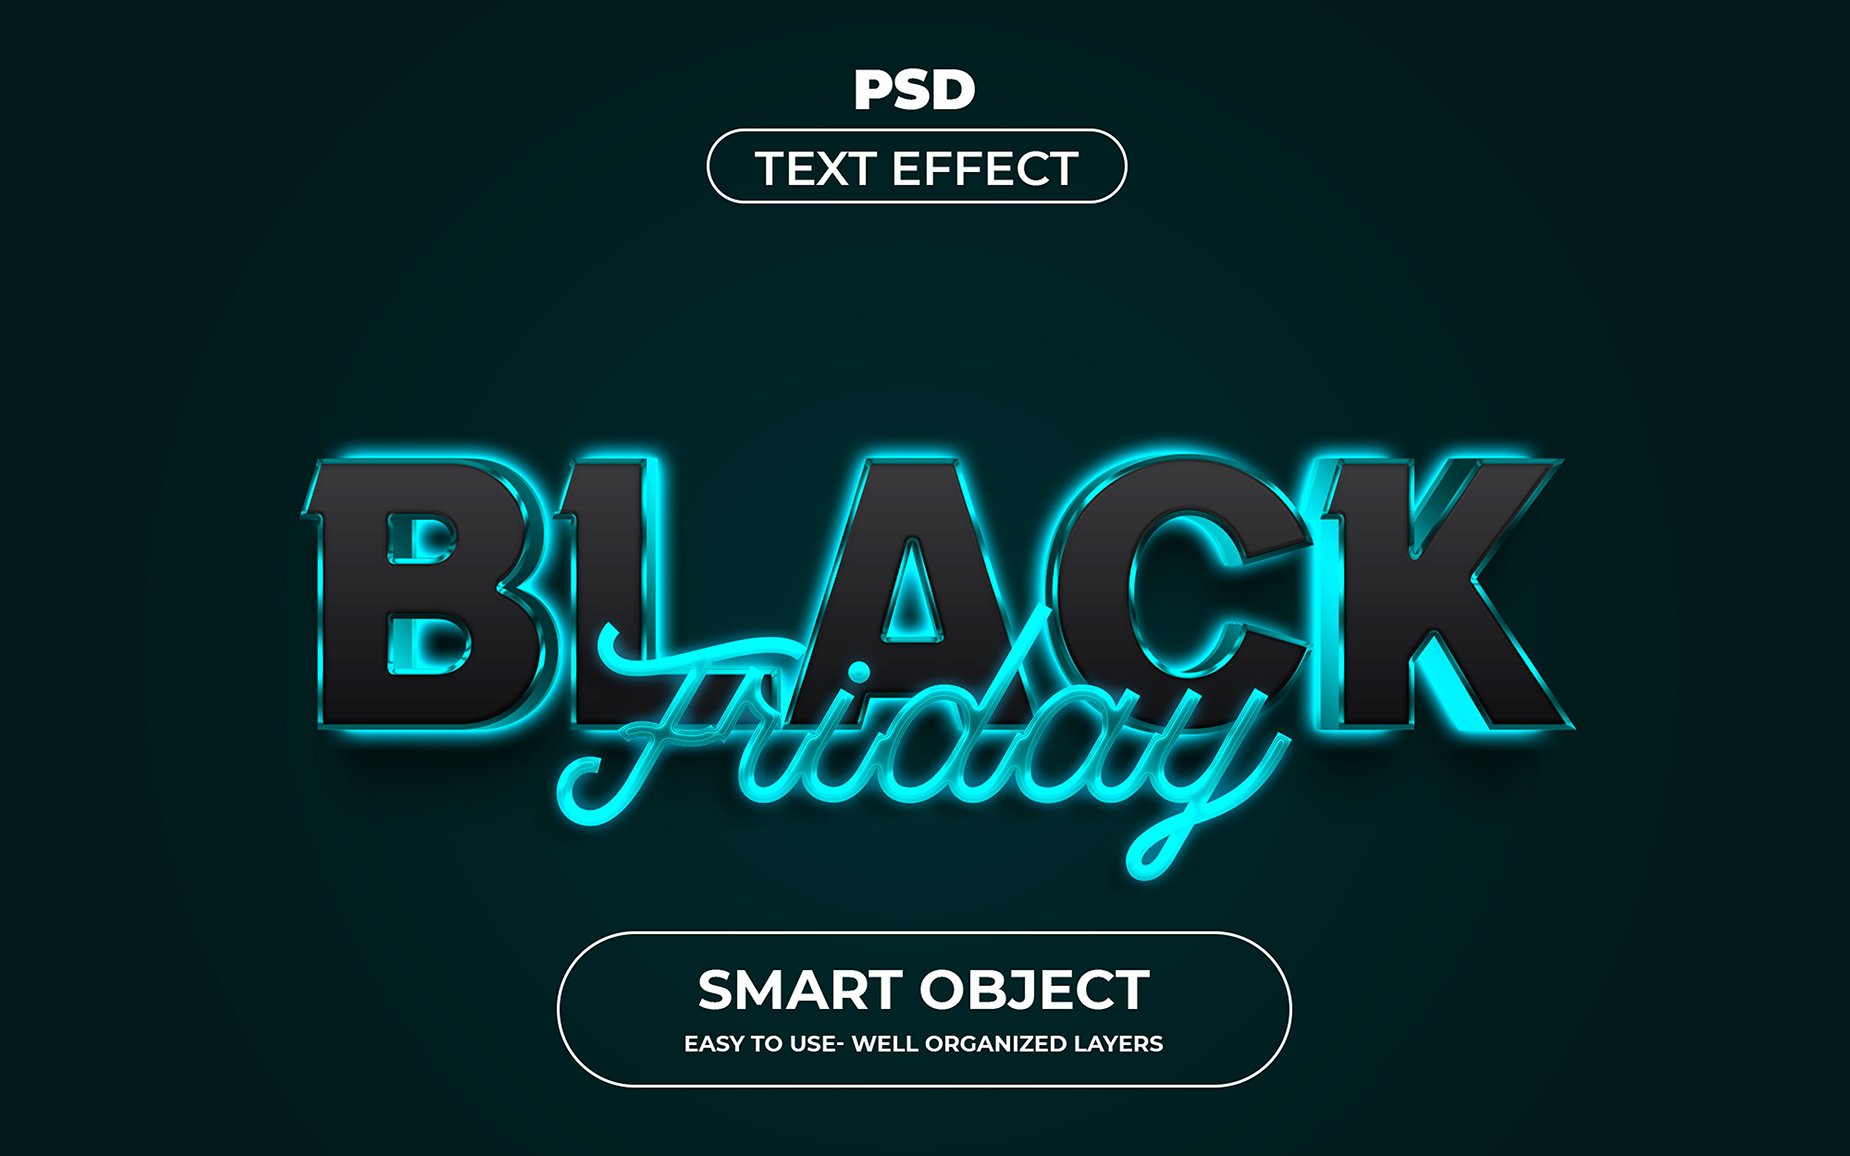 Black Friday 3d Editable Text Effecover image.